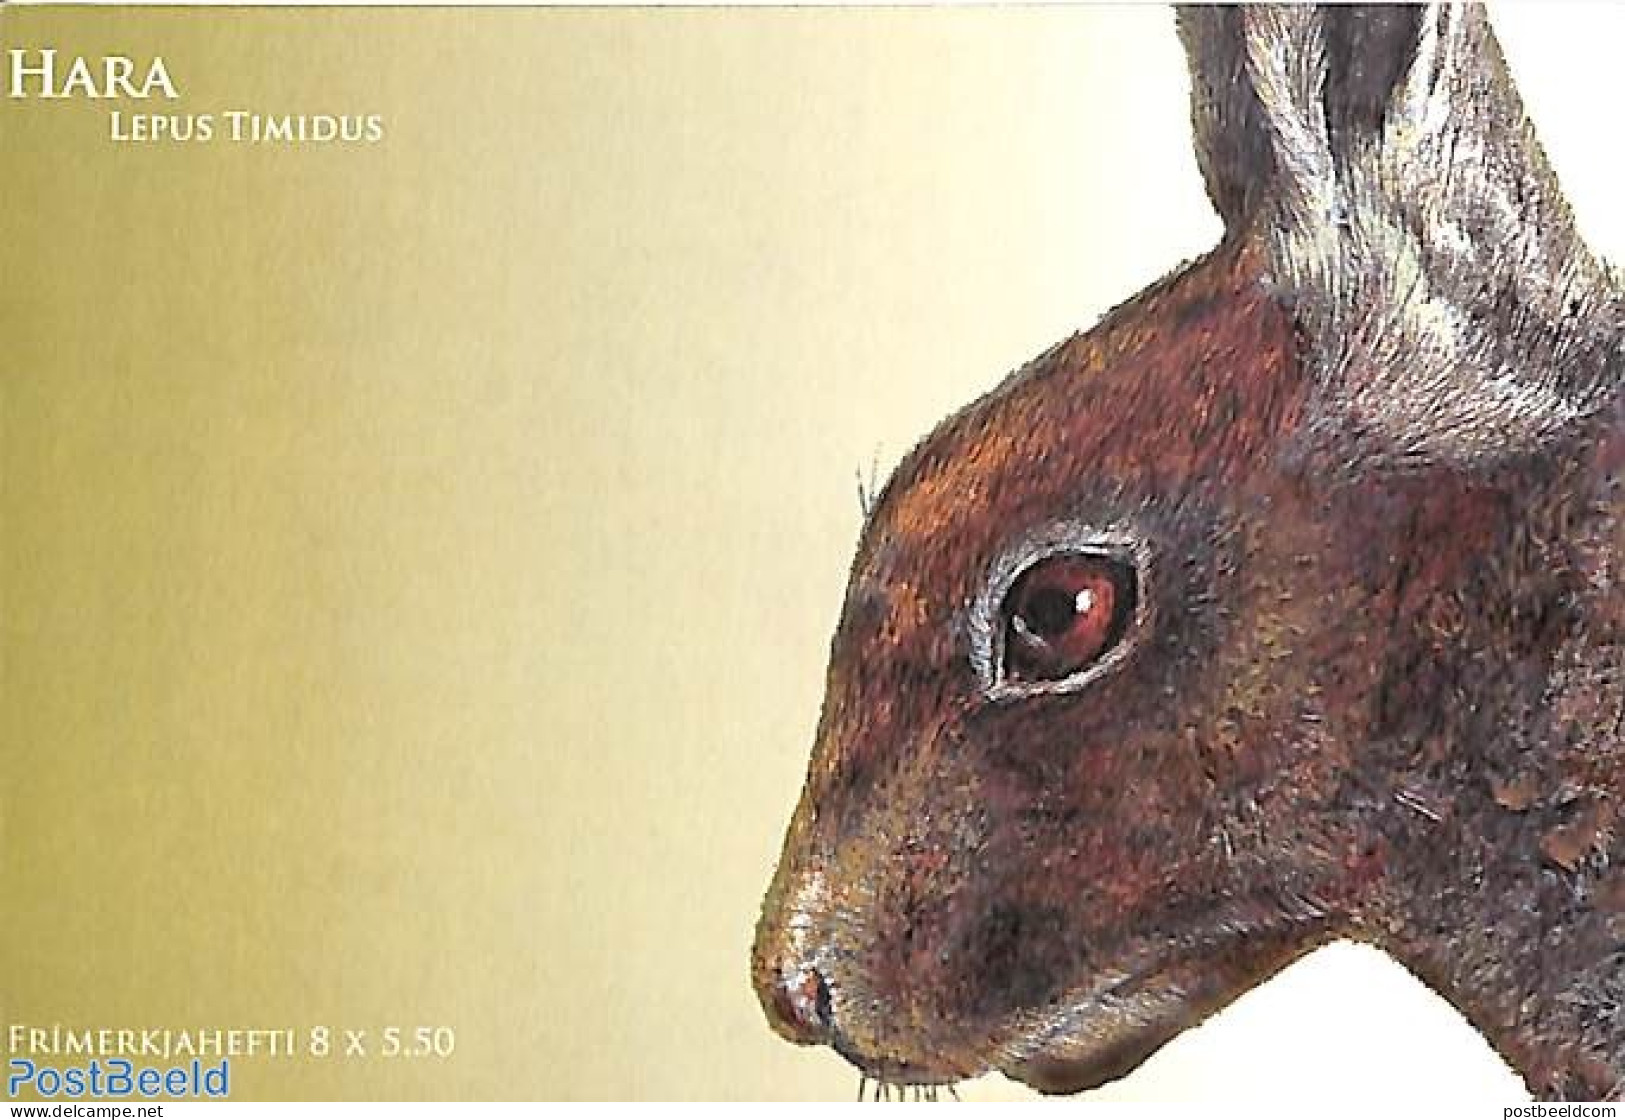 Faroe Islands 2005 Rabbits Booklet, Mint NH, Nature - Rabbits / Hares - Stamp Booklets - Unclassified